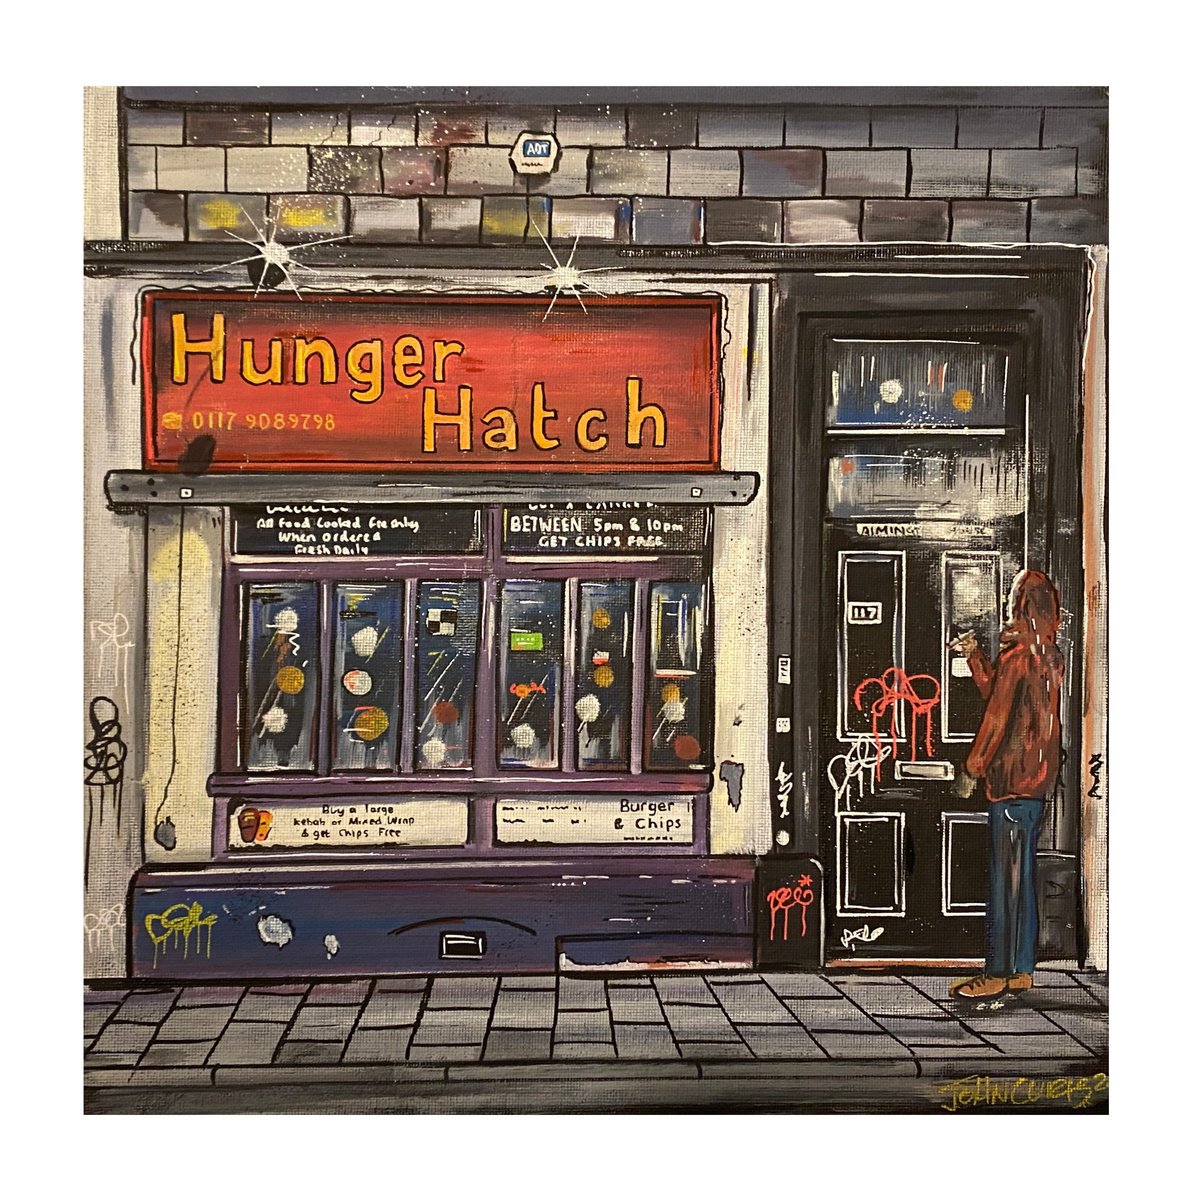 Hunger Hatch - Original on canvas board by John Curtis